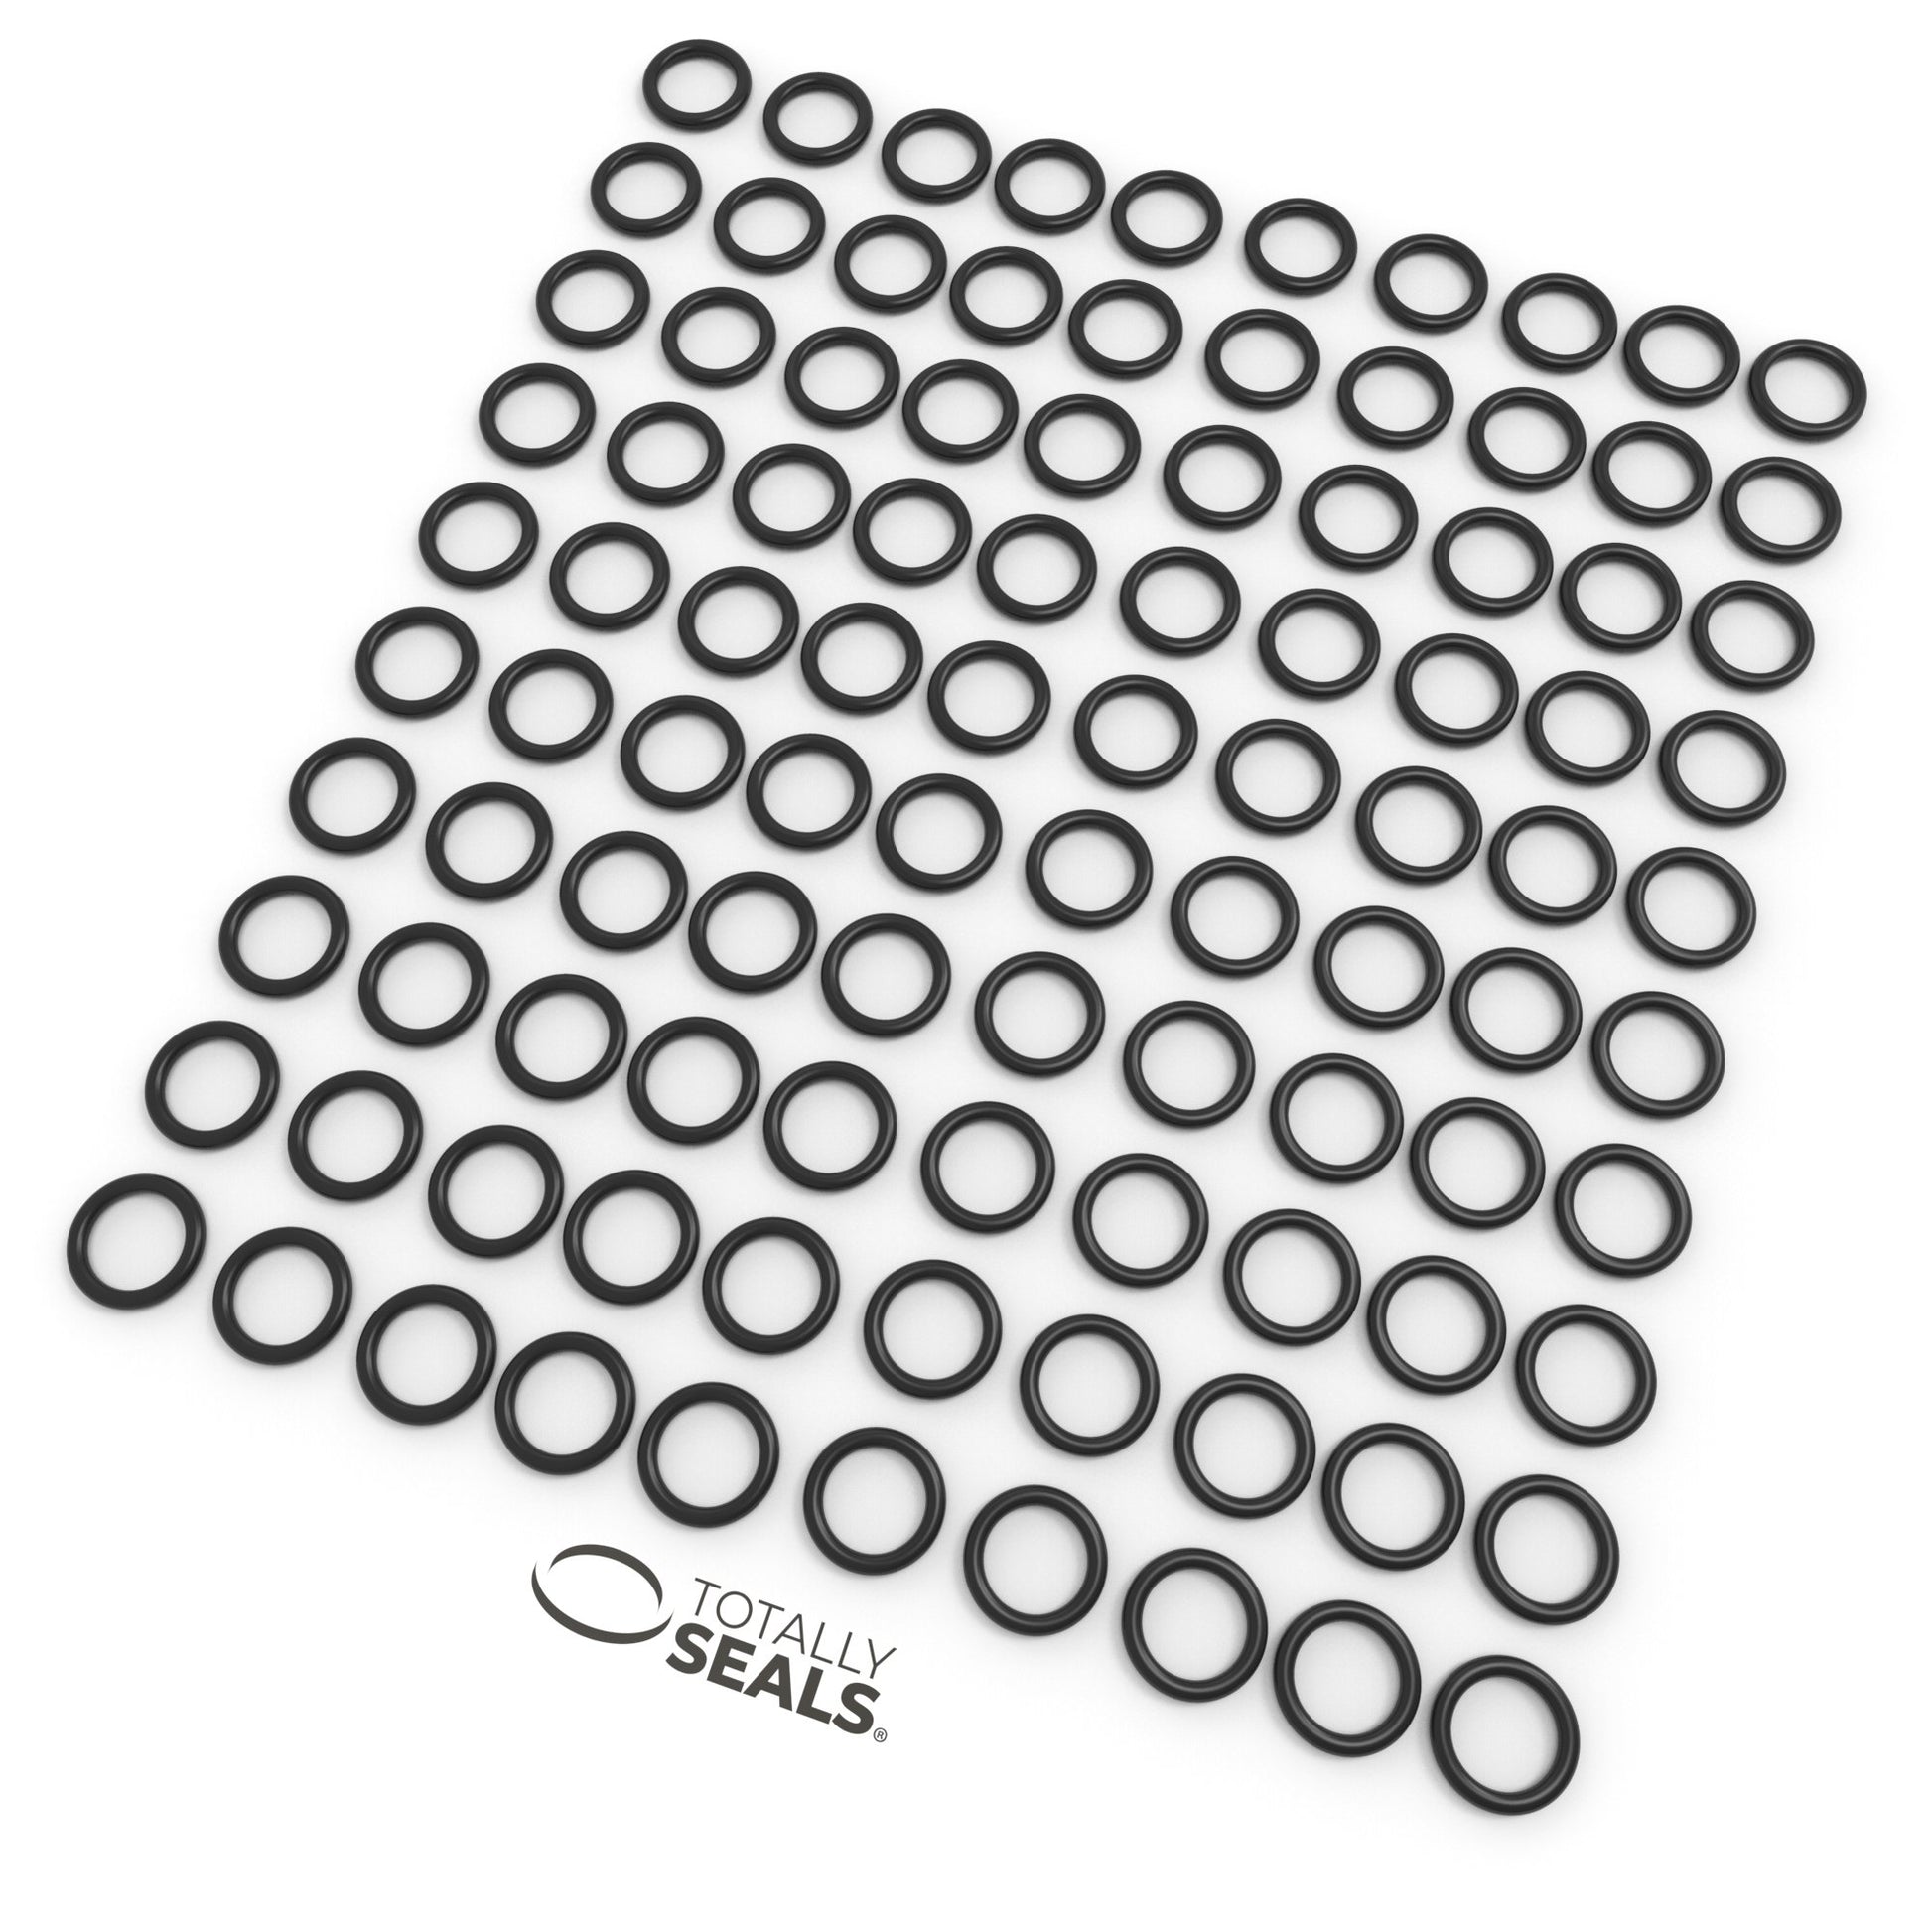 13mm x 3.5mm (20mm OD) Nitrile O-Rings - Totally Seals®